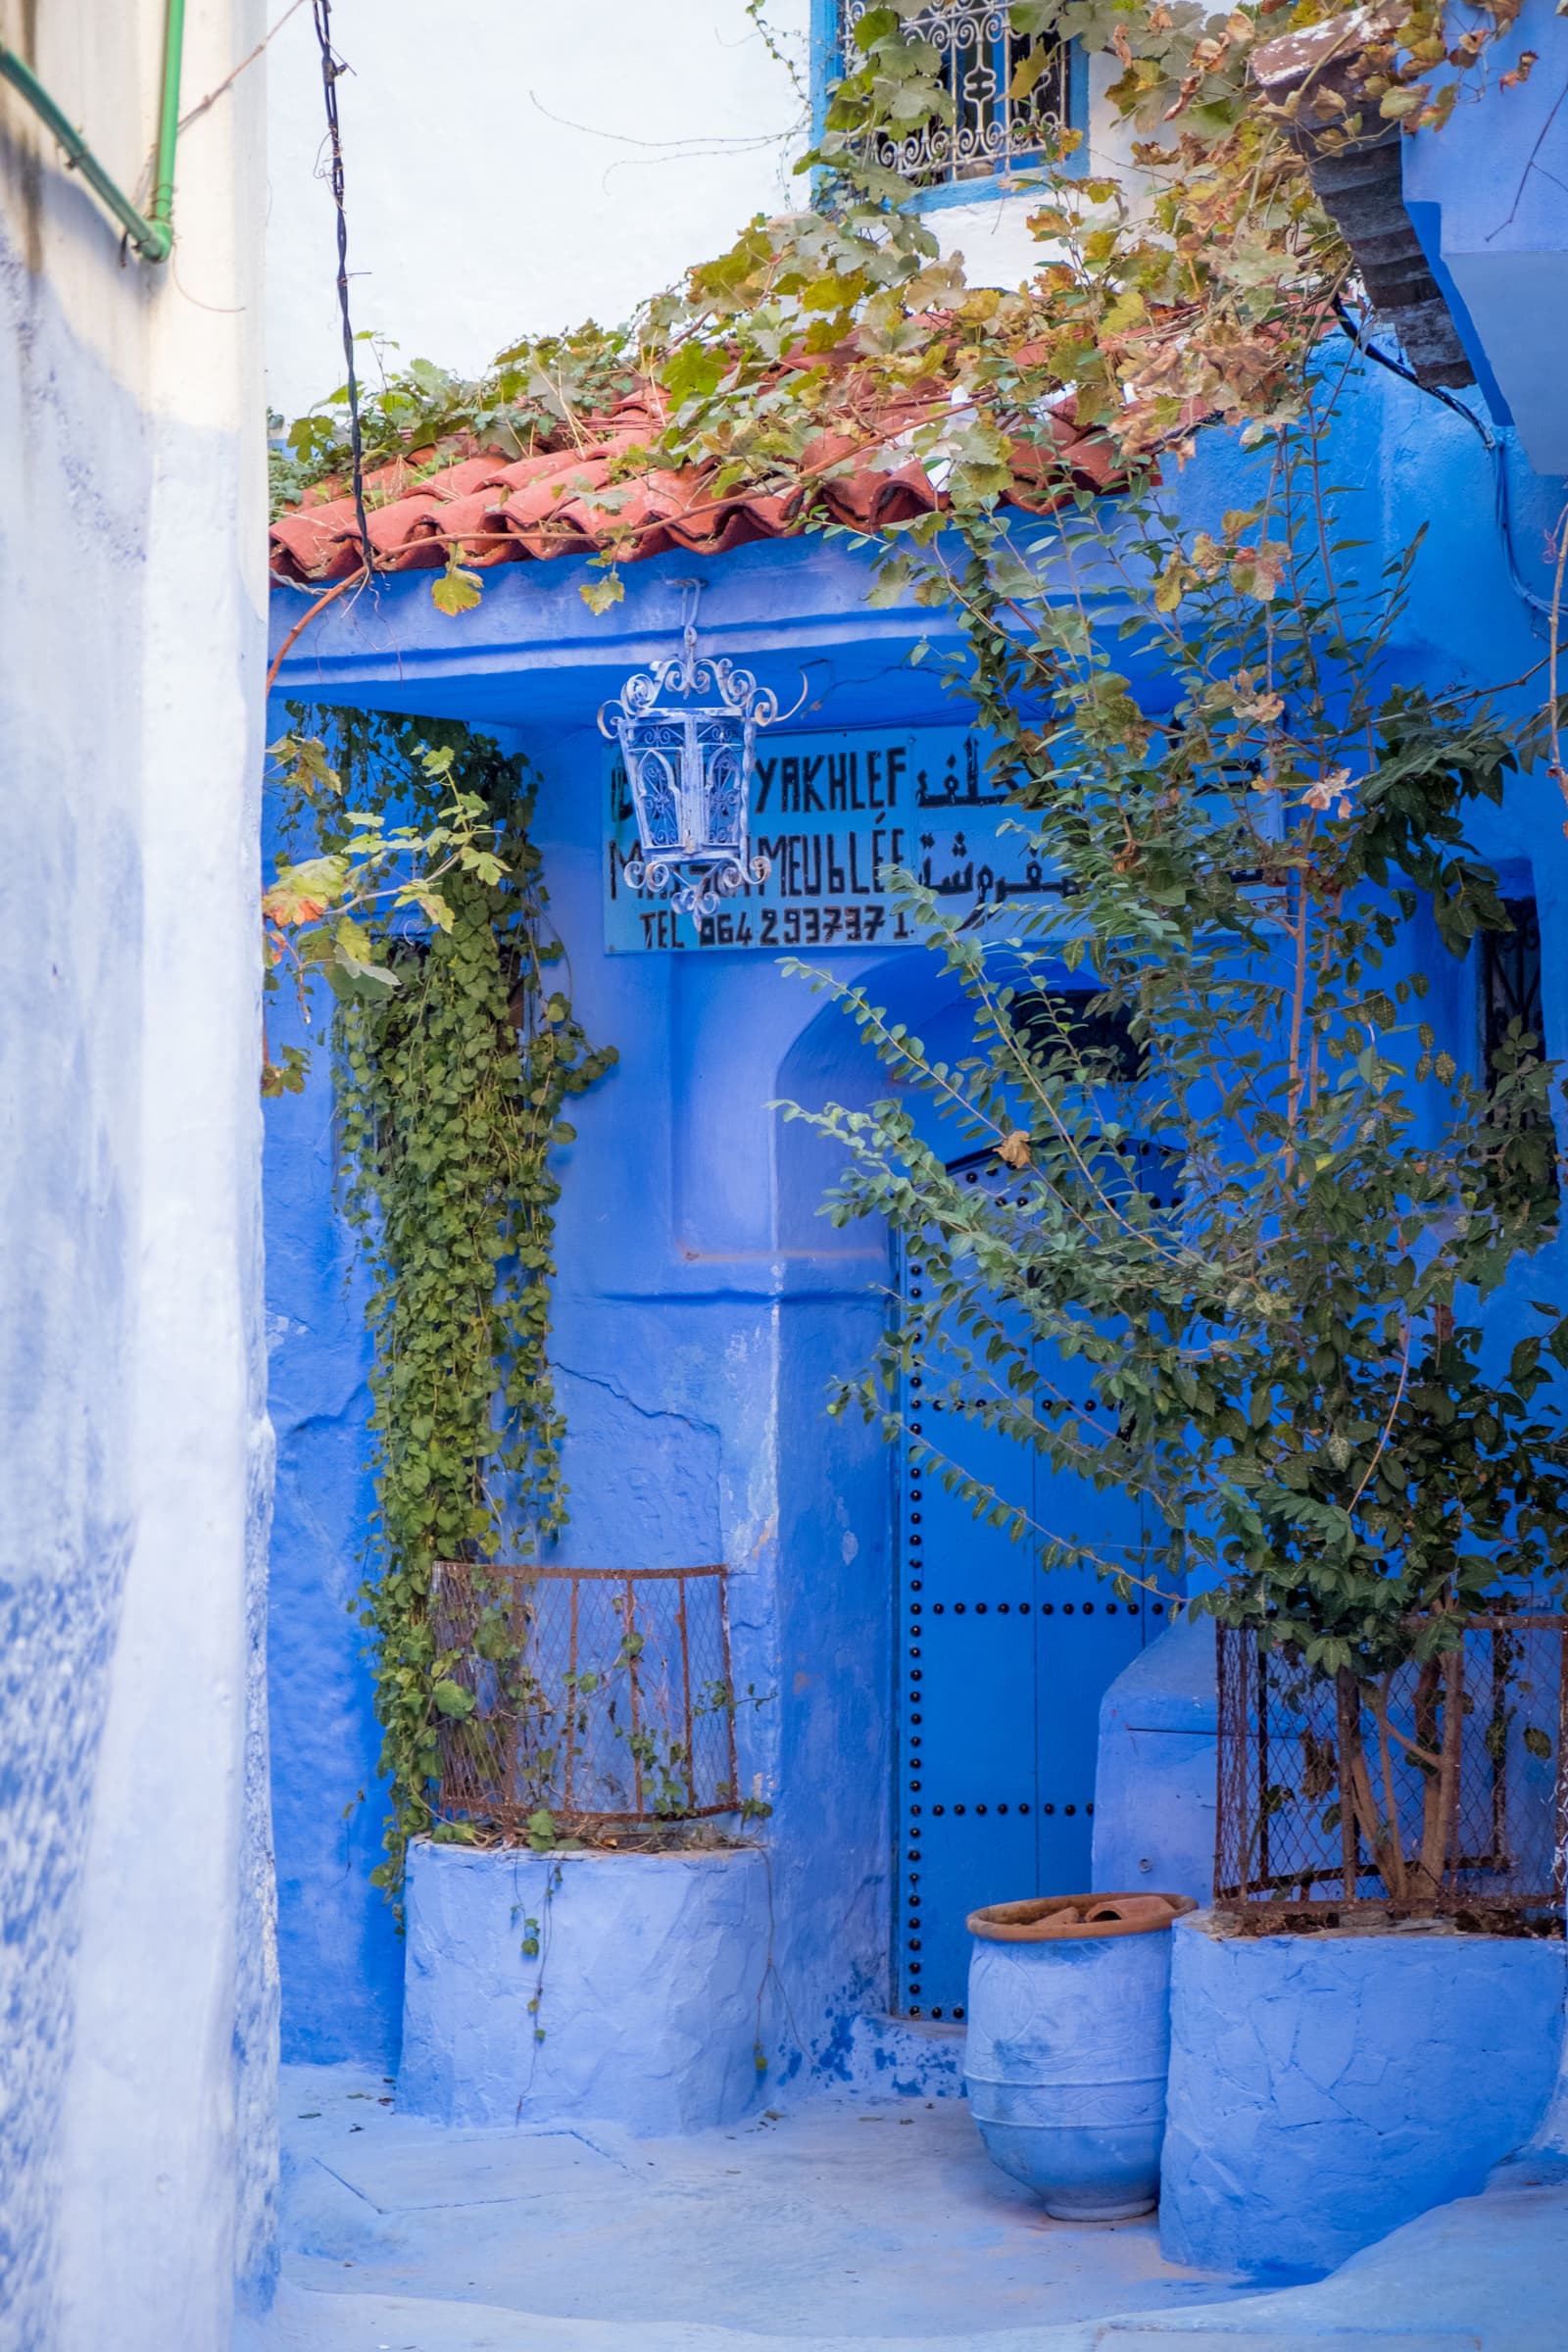 A romantic home entrance surrounded by greenery, Chefchaouen, Morocco